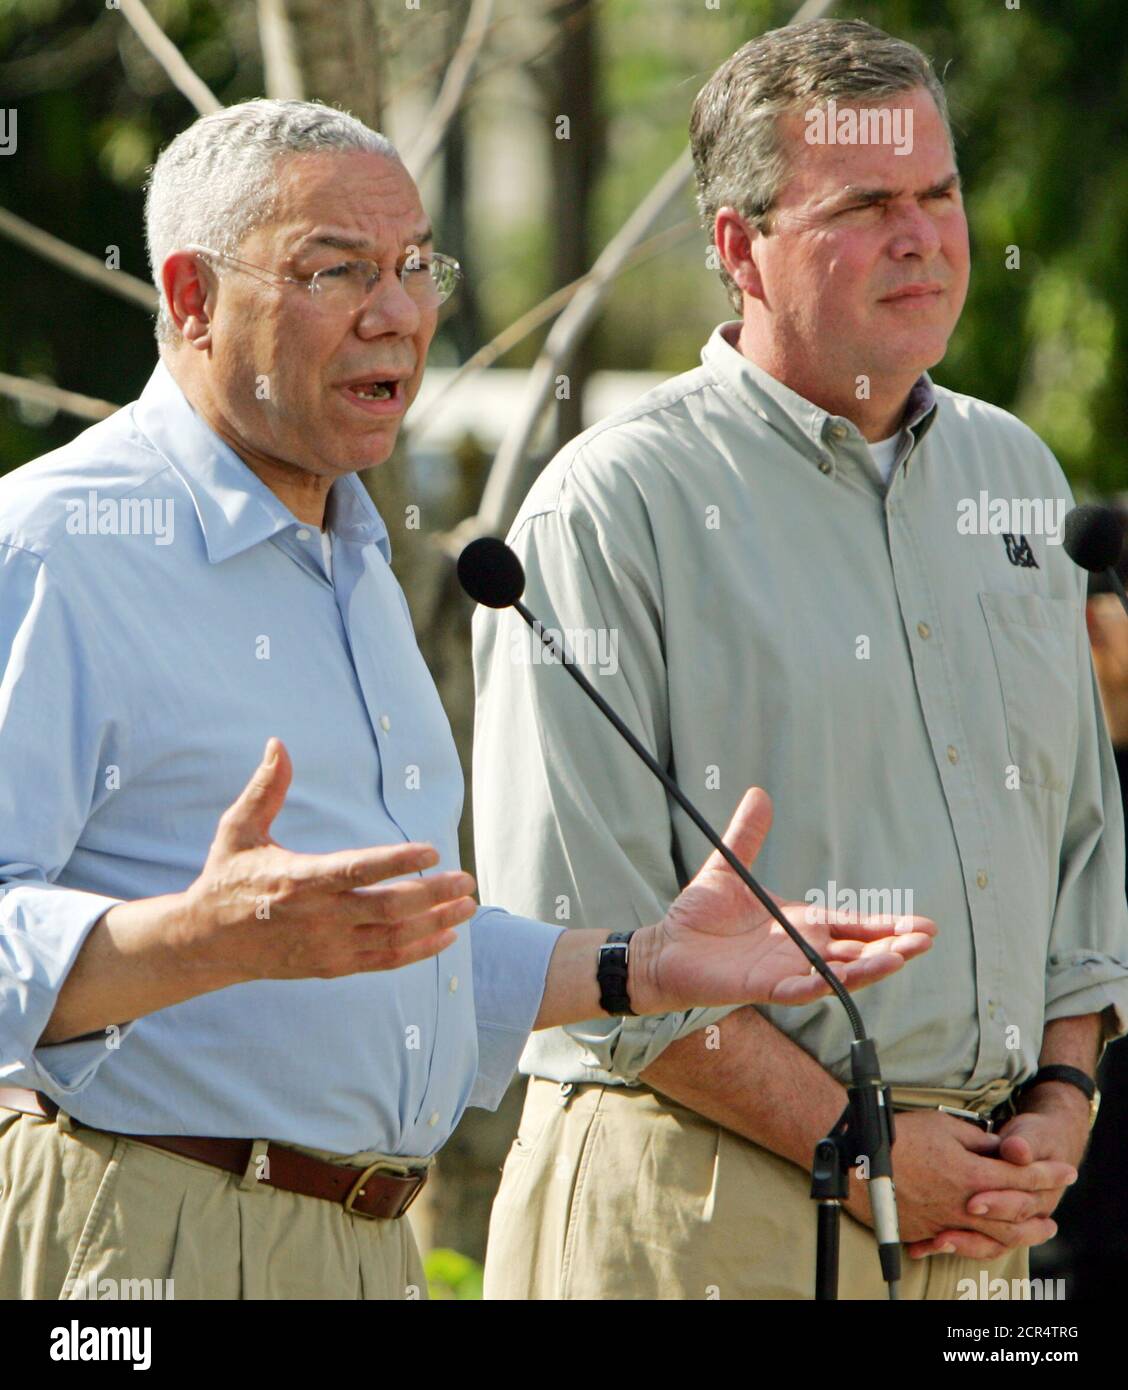 US Secretary of State Colin Powell and Florida Governor Jeb Bush attend a  news conference in tsunami-hit Phuket, Thailand. U.S. Secretary of State  Colin Powell (L) speaks as Florida Governor Jeb Bush